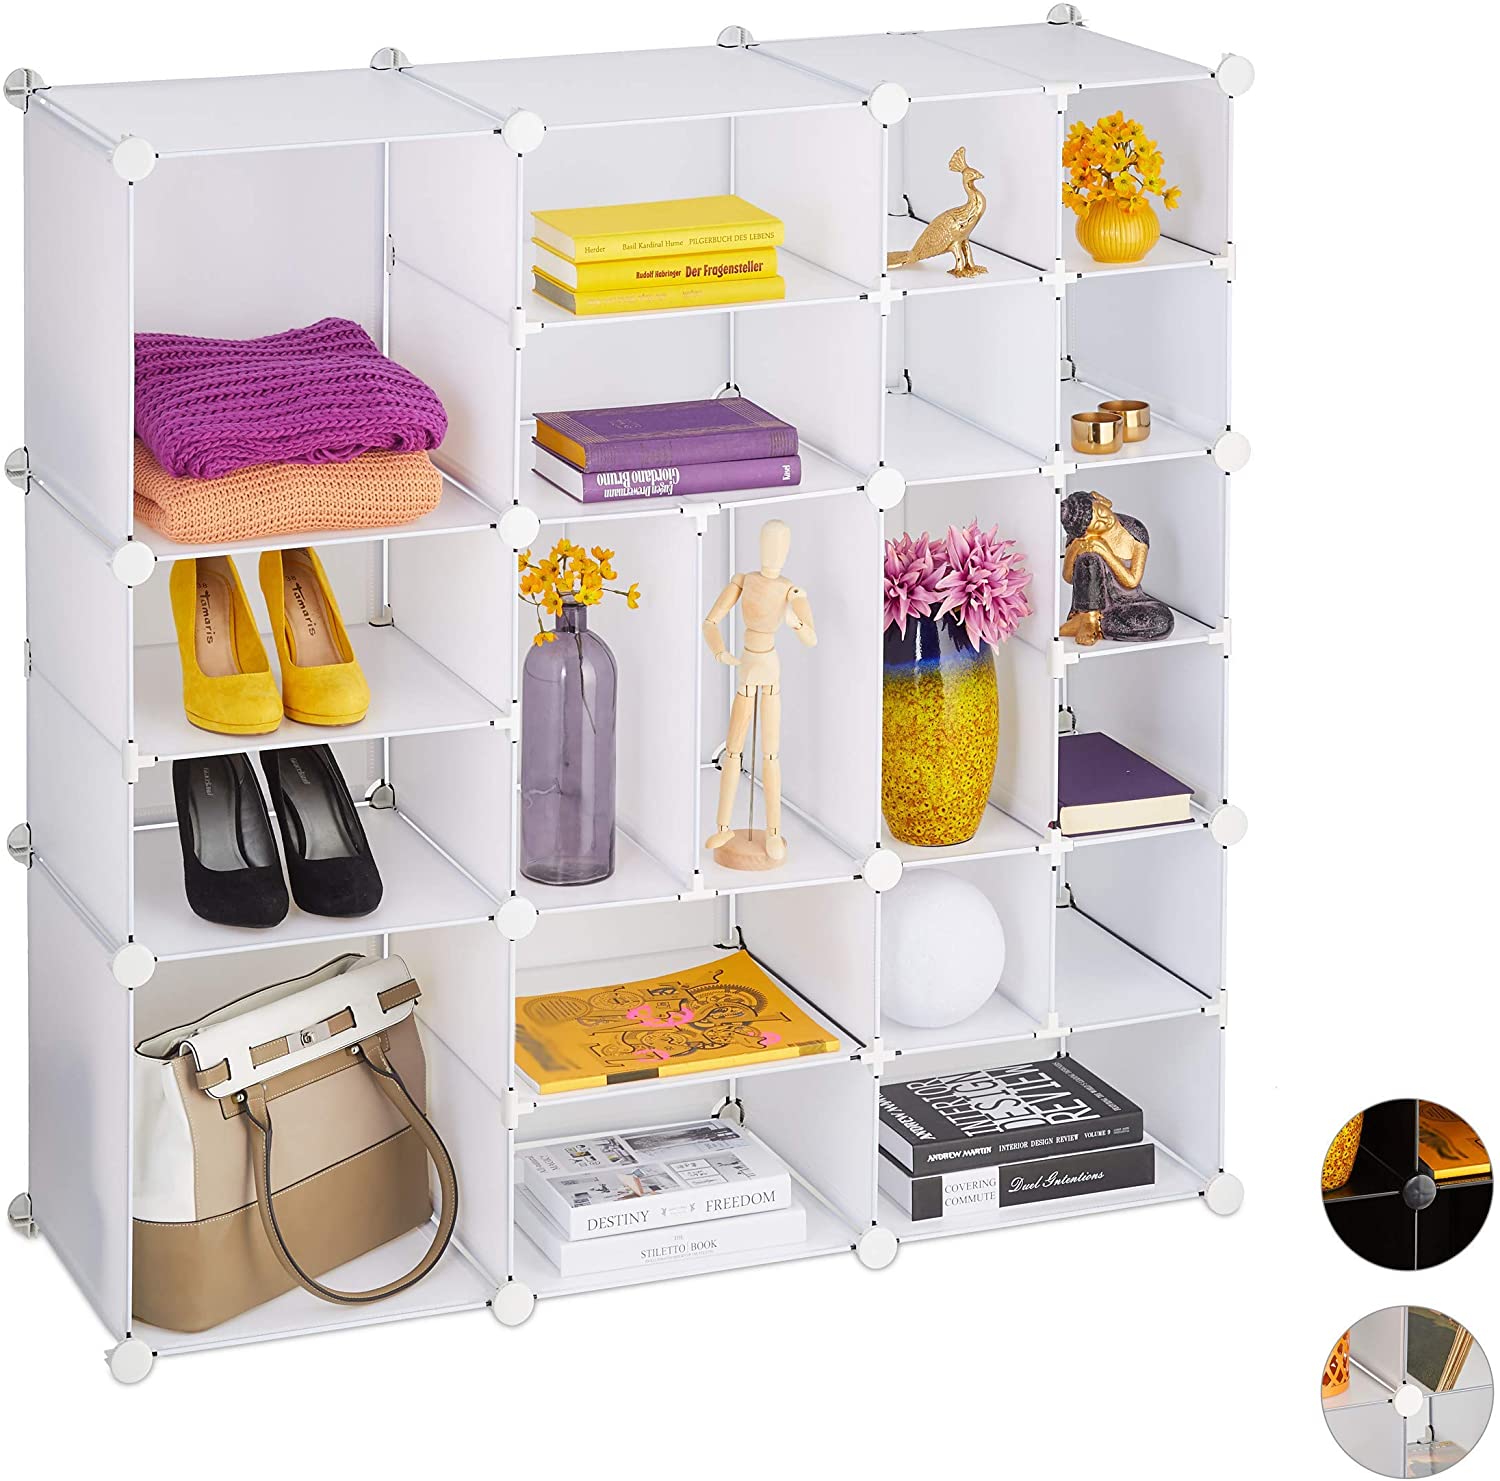 Relaxdays Shelf System 20 Compartments Large Open Diy Shelving Plastic Room